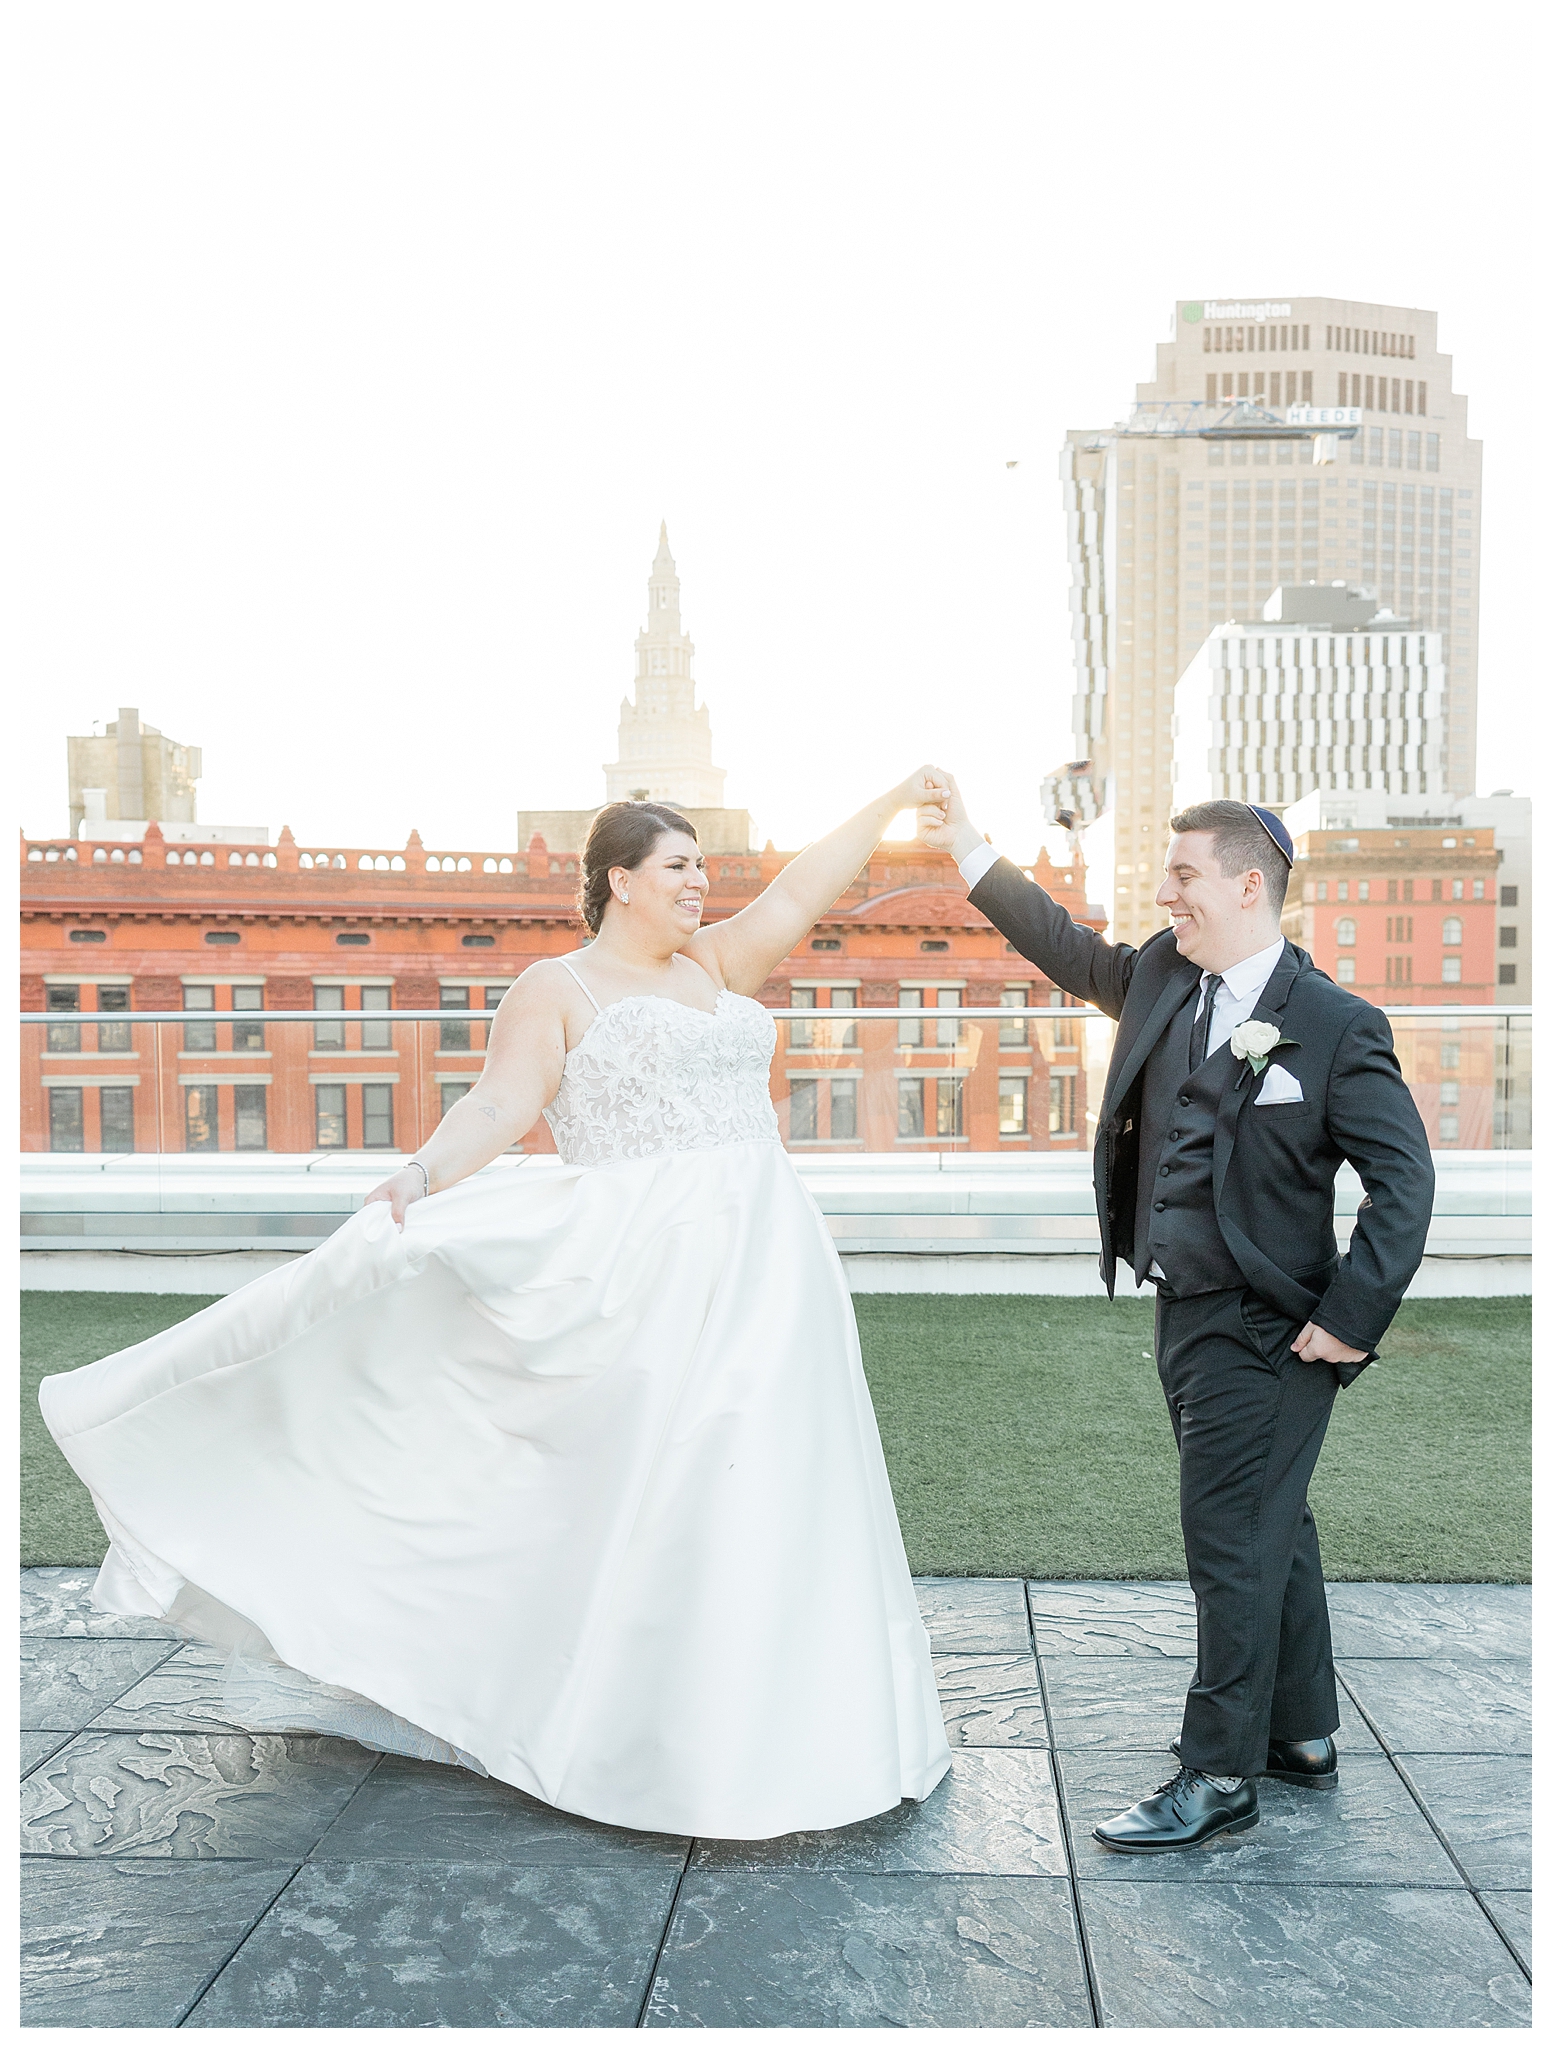 Bride spinning dress while holding groom's hand on a rooftop in Cleveland Ohio